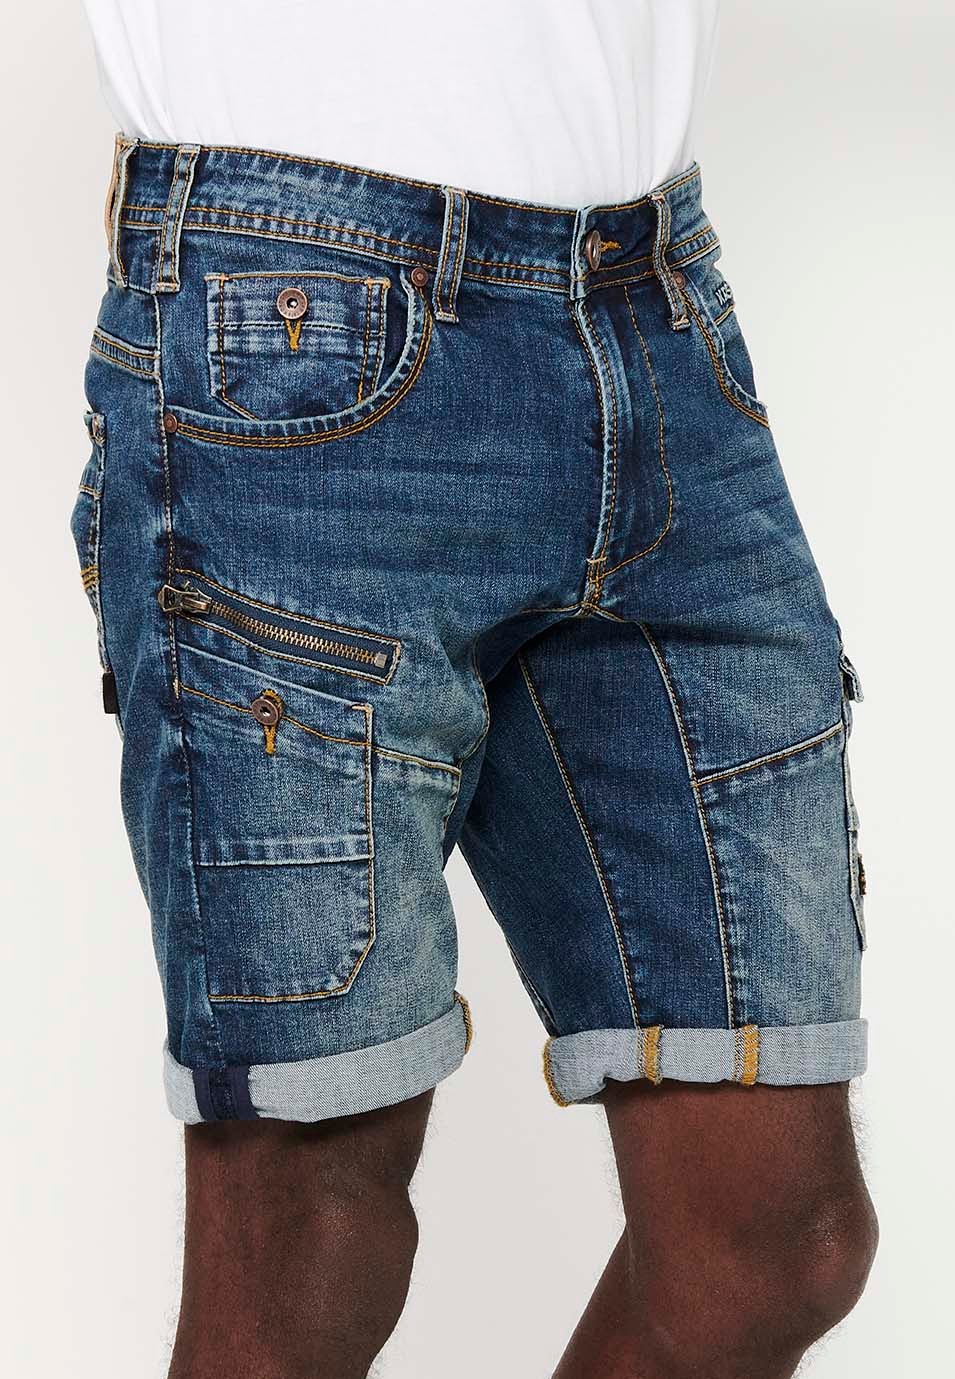 Denim Bermuda Shorts with Turn-Up Finish and Front Zipper and Button Closure with Five Pockets, One Pocket Pocket with Blue Front Details for Men 4